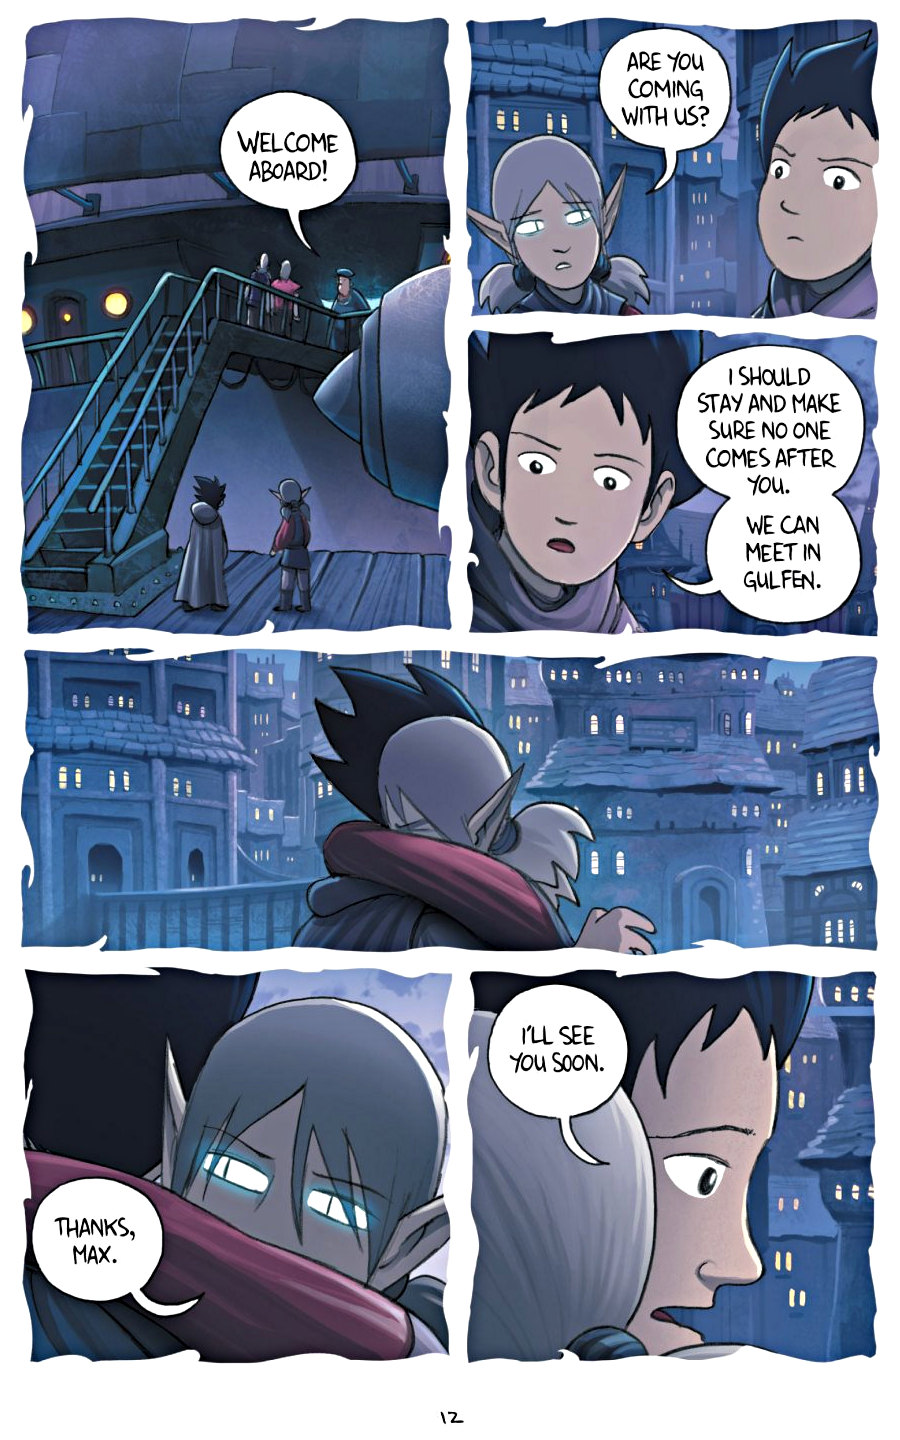 page 12 of amulet 5 prince of the elves graphic novel